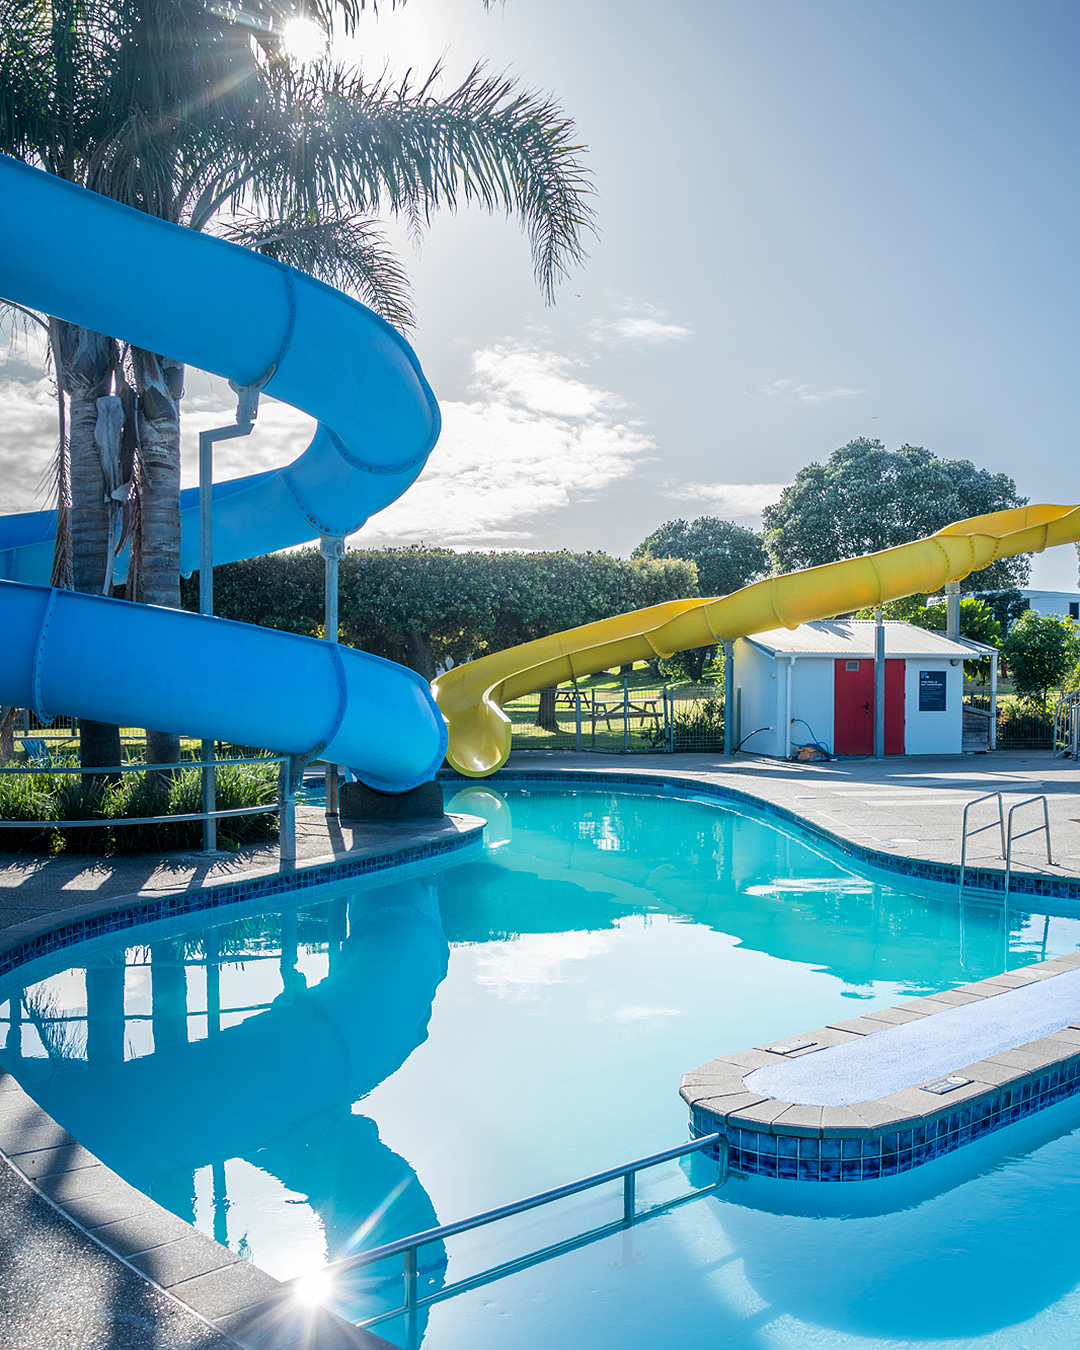 An outdoor pool complete with slides at Ohope Beach Holiday Park, one of the best camping grounds near Tauranga.